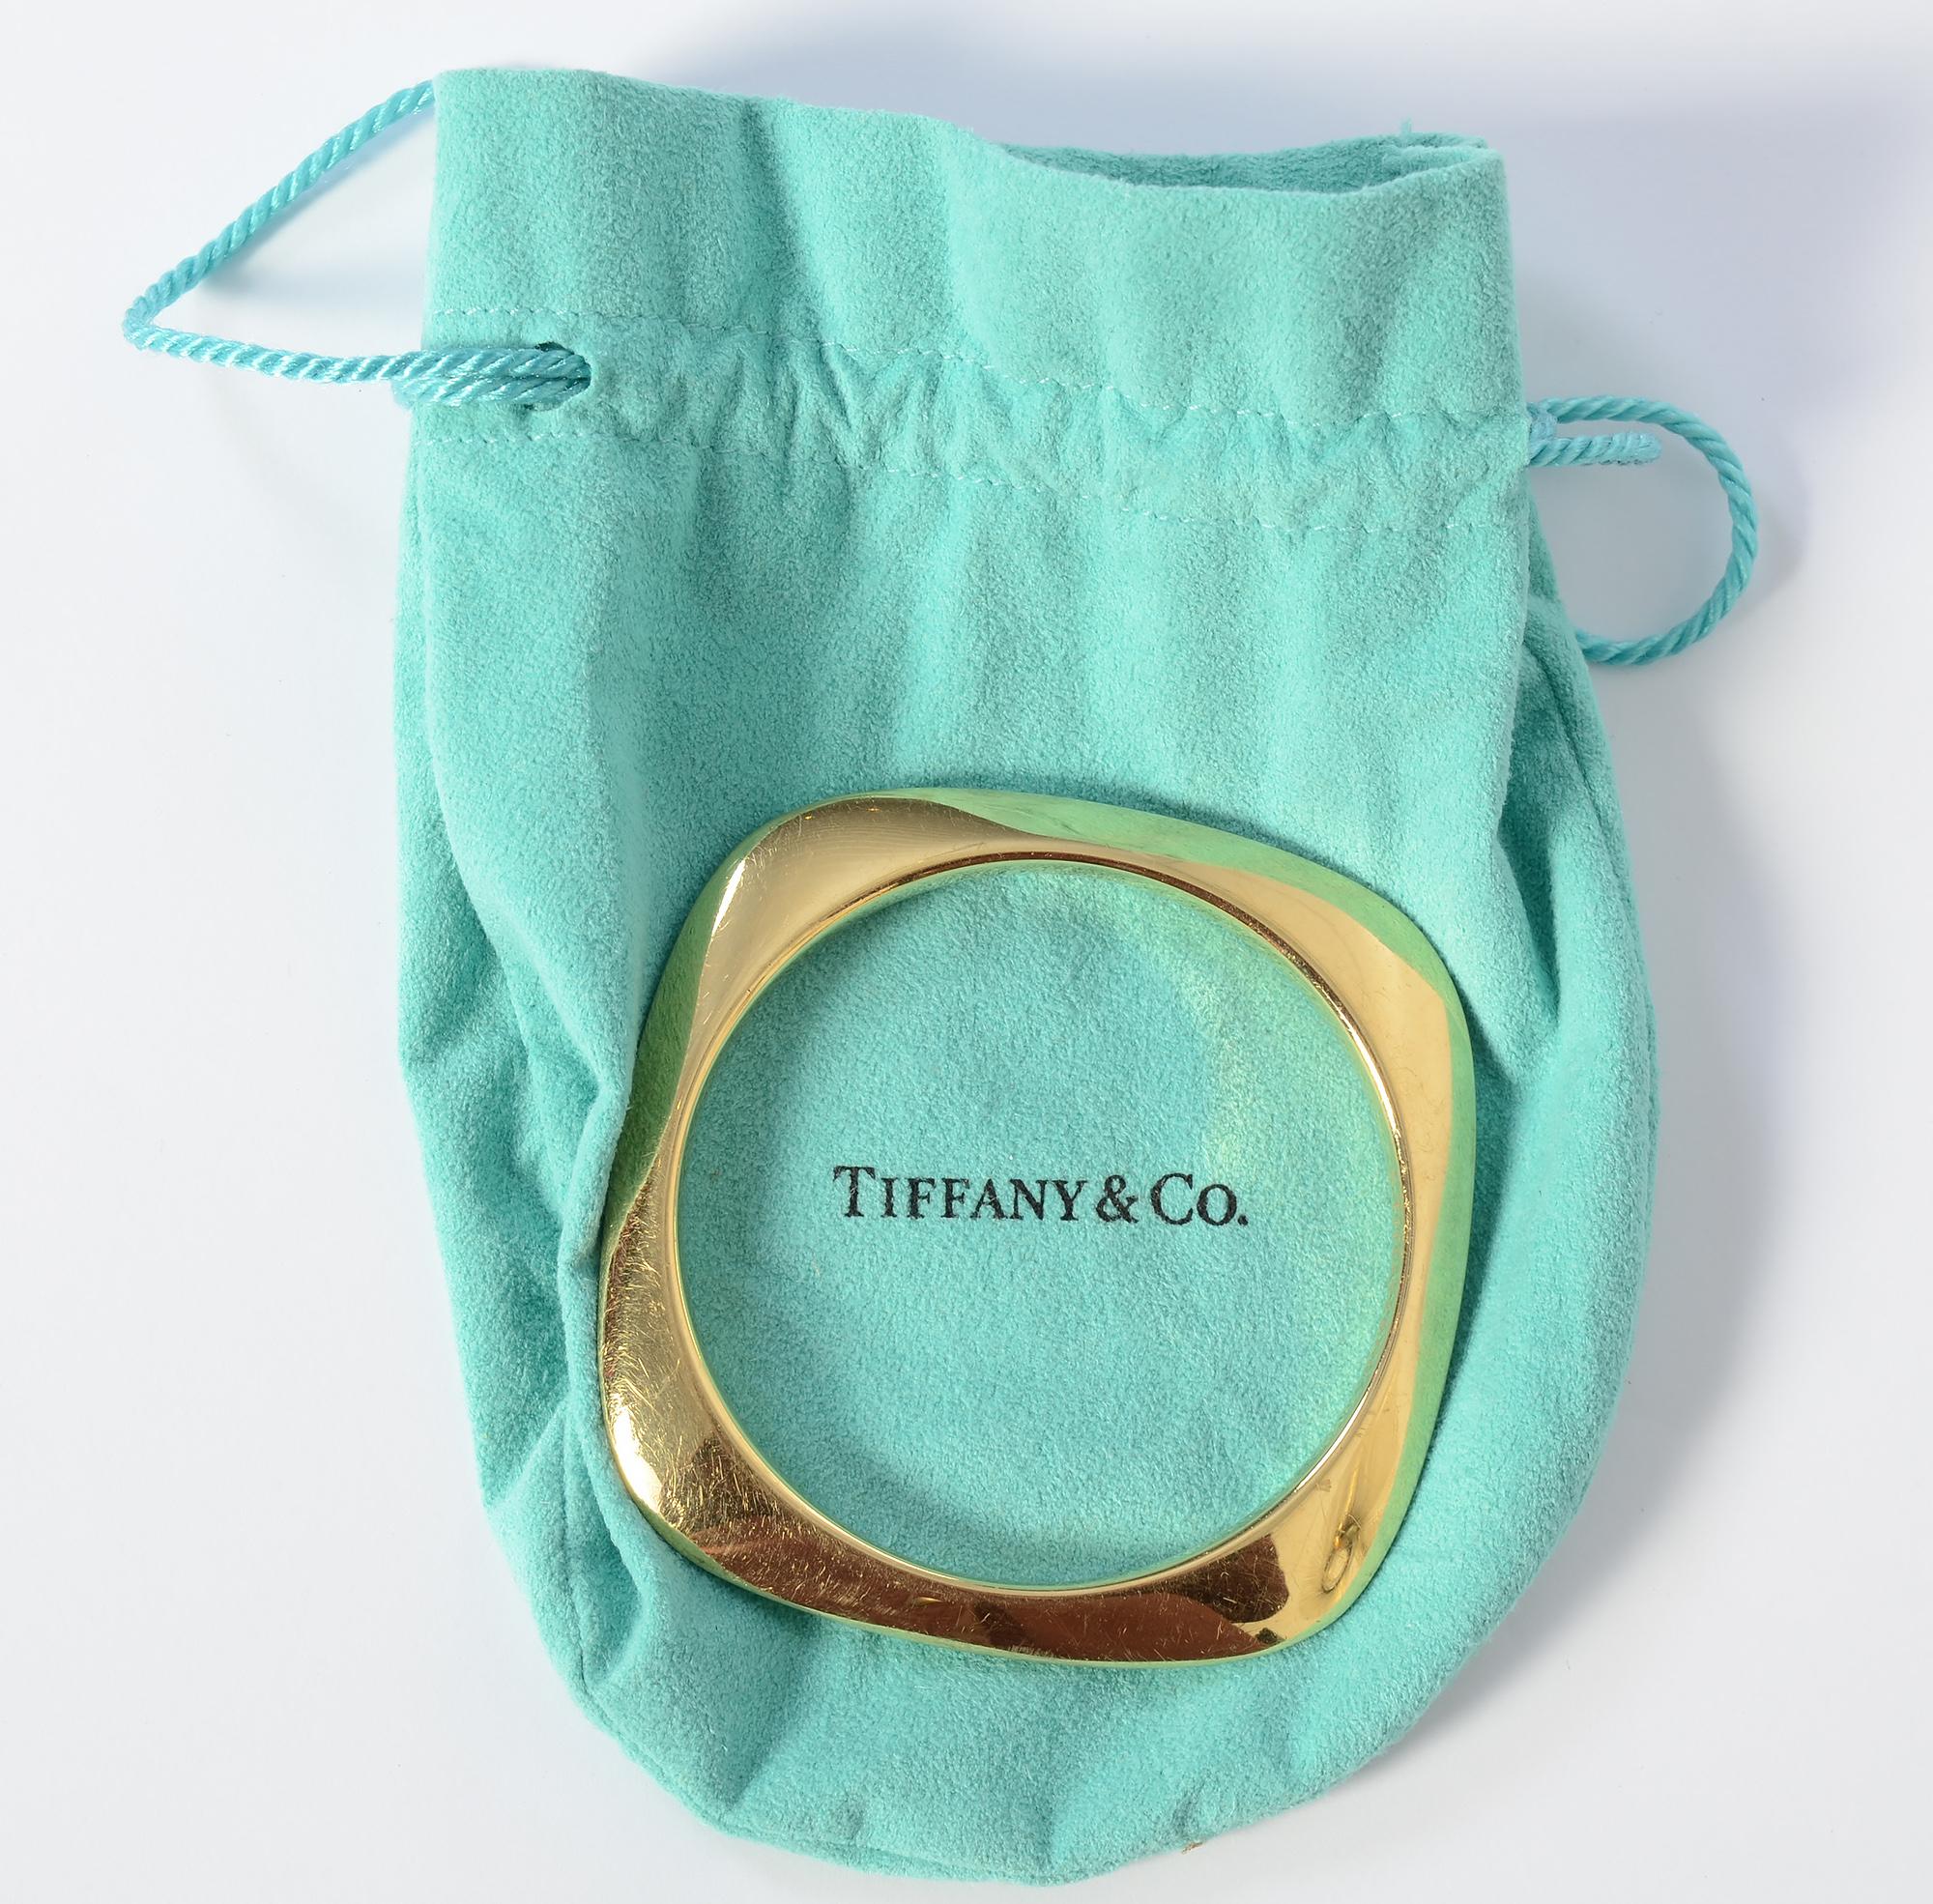 Wonderful Modernist design 18 karat gold bangle bracelet by Tiffany. The square bracelet has rounded edges and a round interior that measures 2 9/16